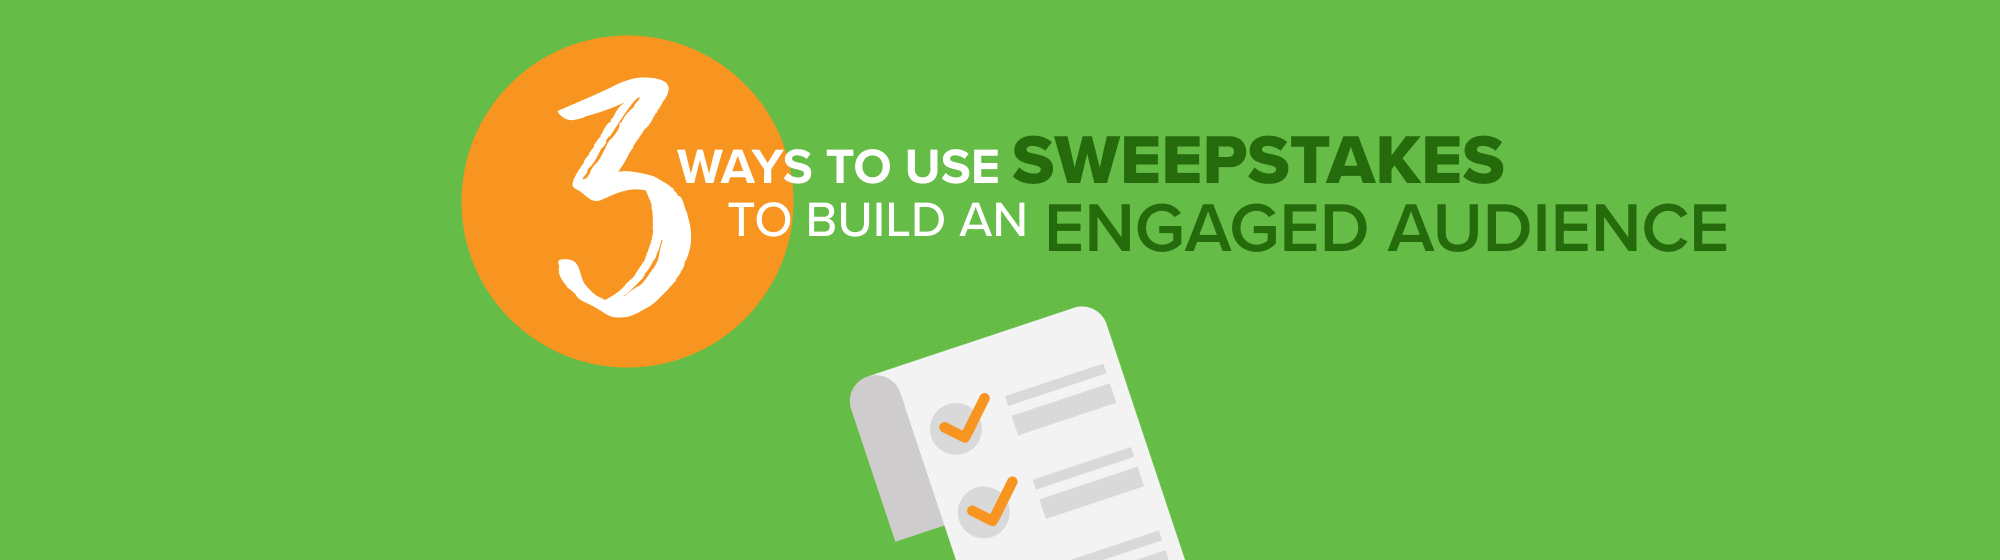 3 ways to use sweepstakes to build an engaged audience